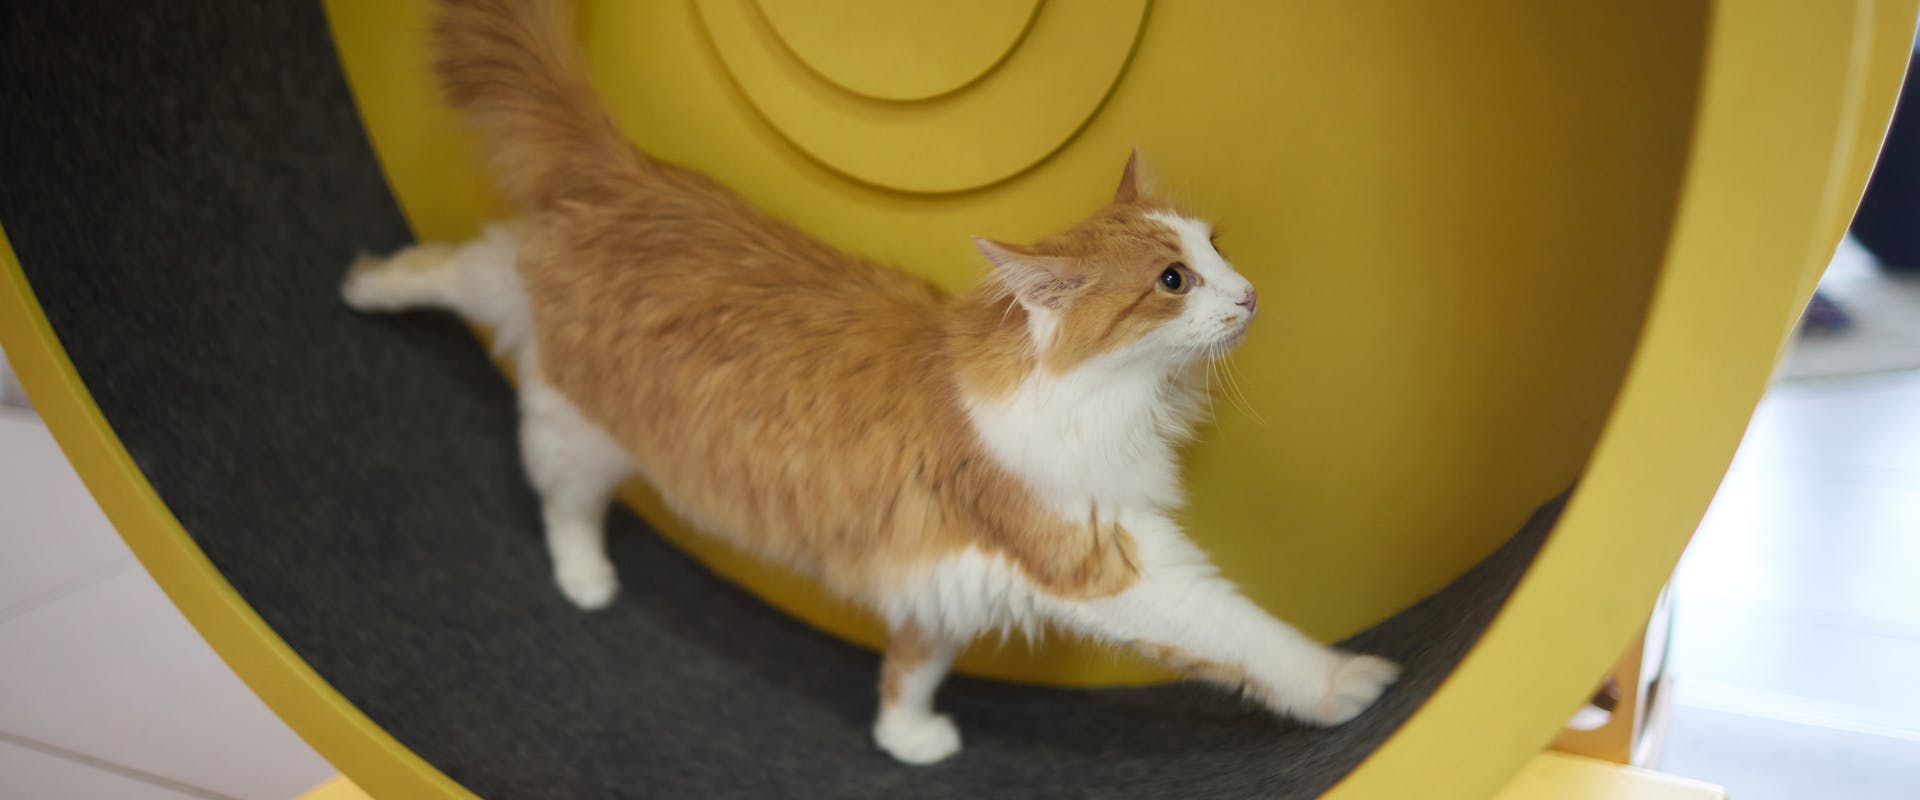 A cat struts on a cat exercise wheel.